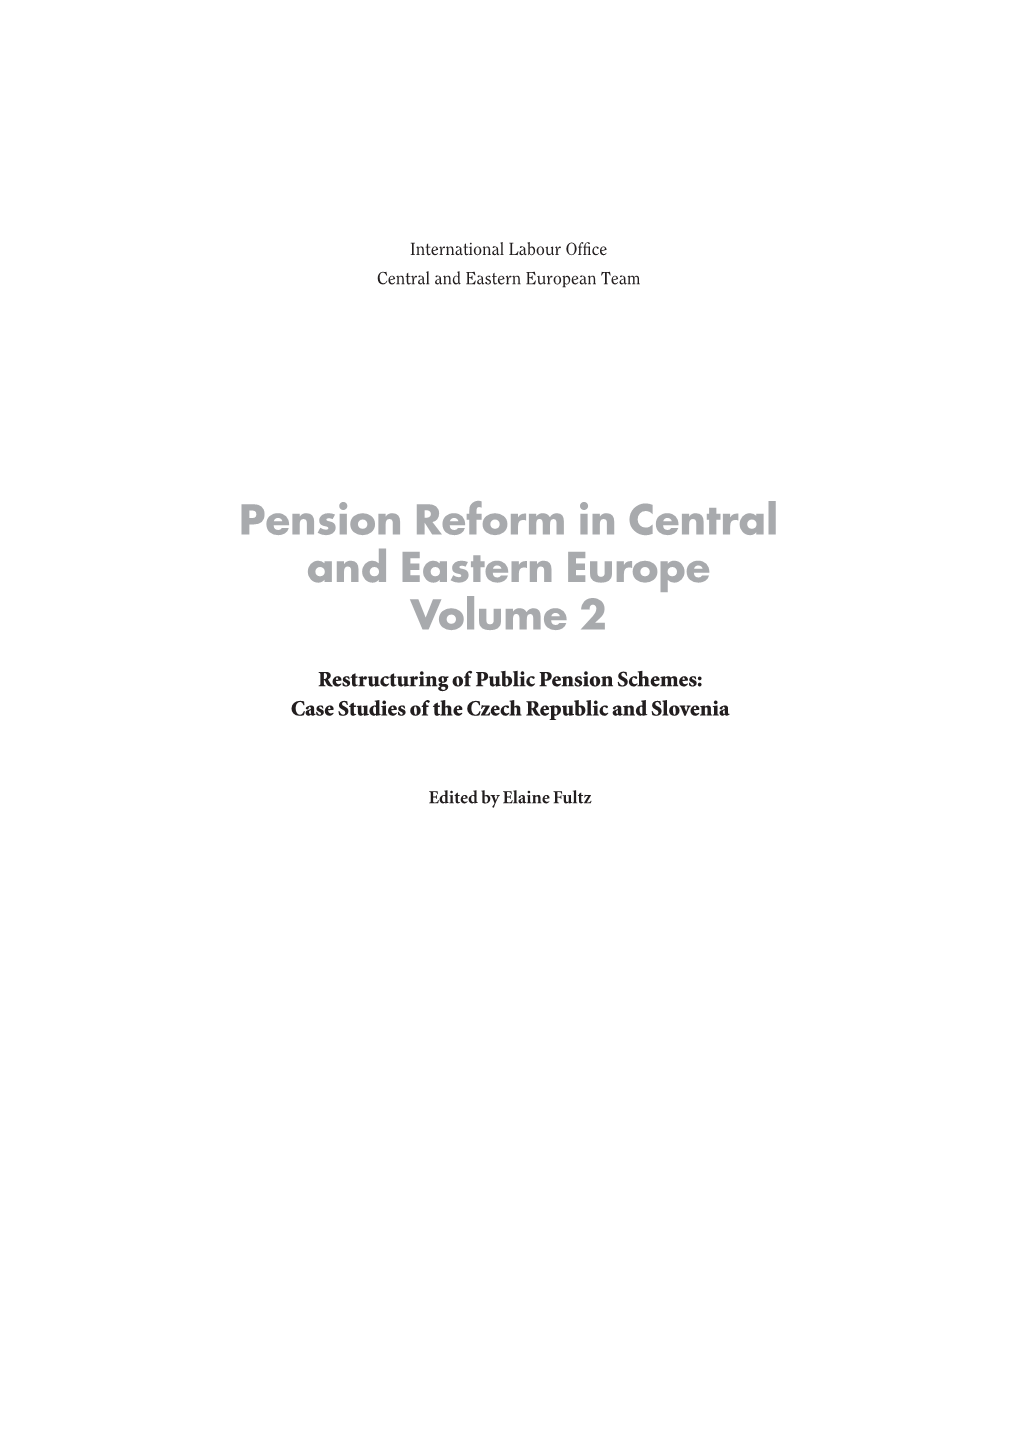 Pension Reform in Central and Eastern Europe Volume 2